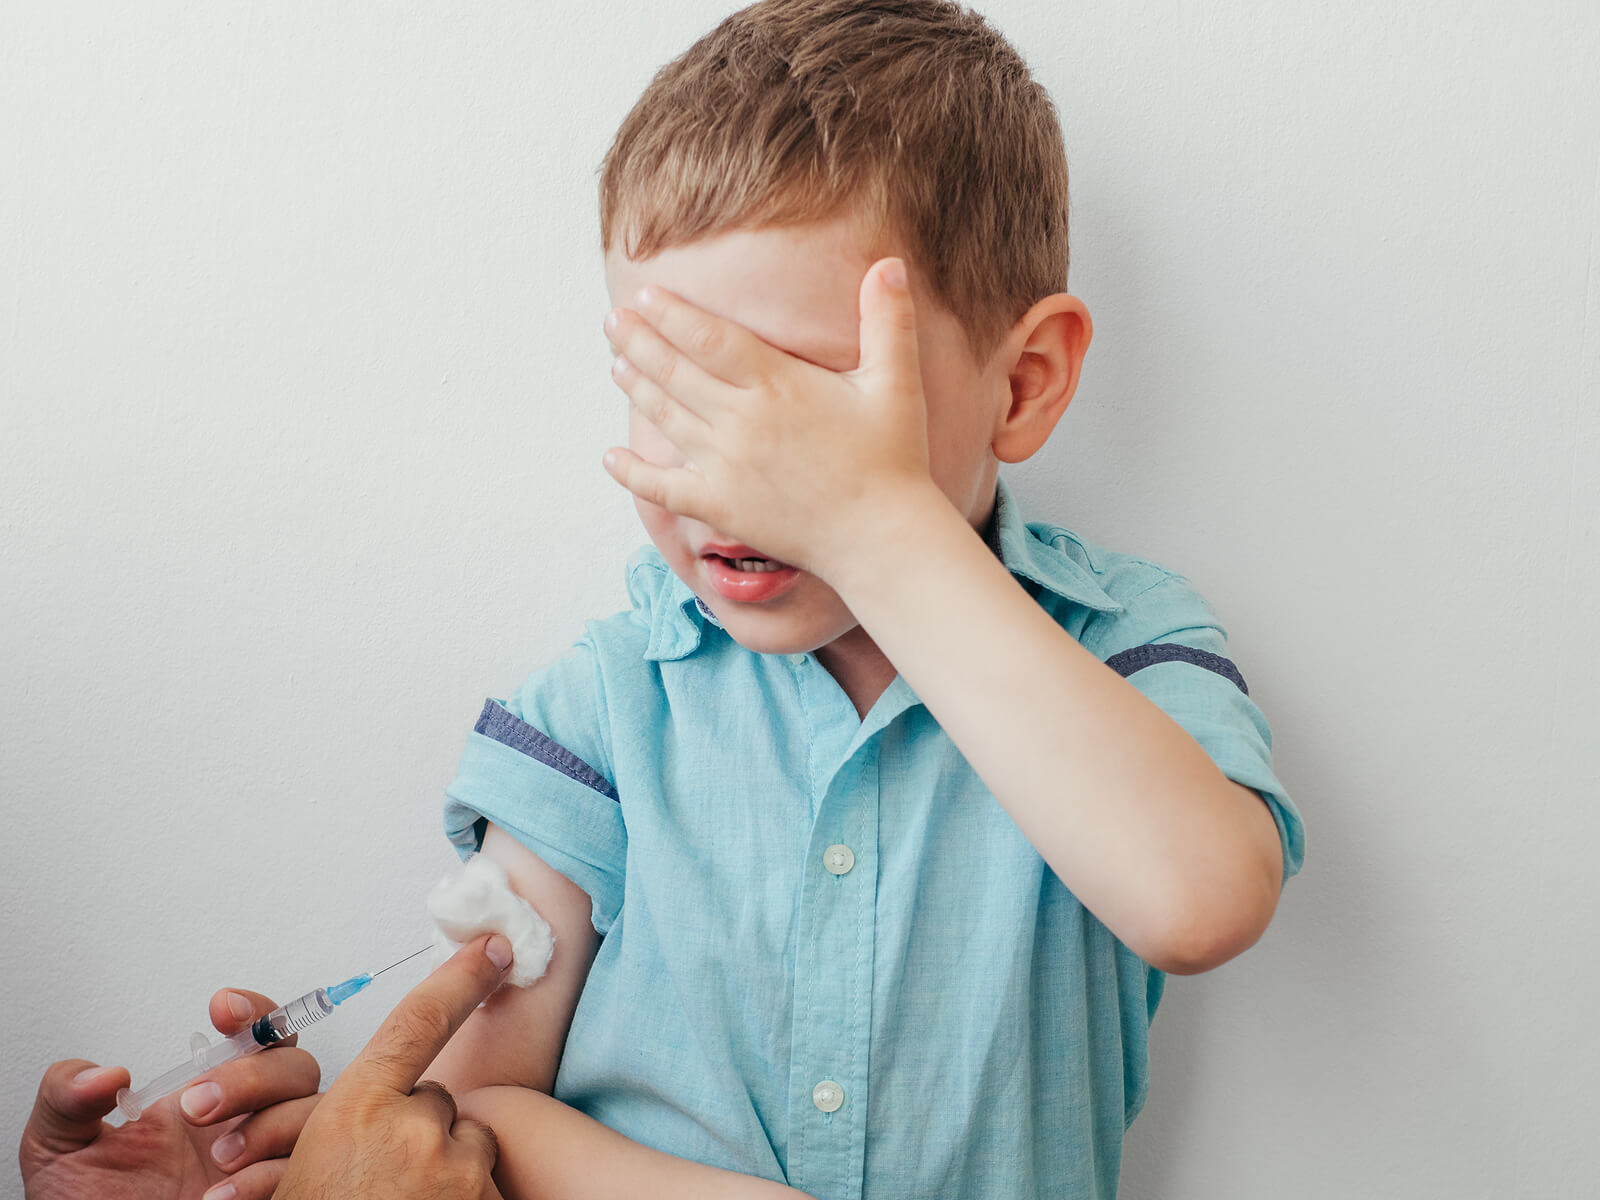 A child who's covering his eyes during an injection.